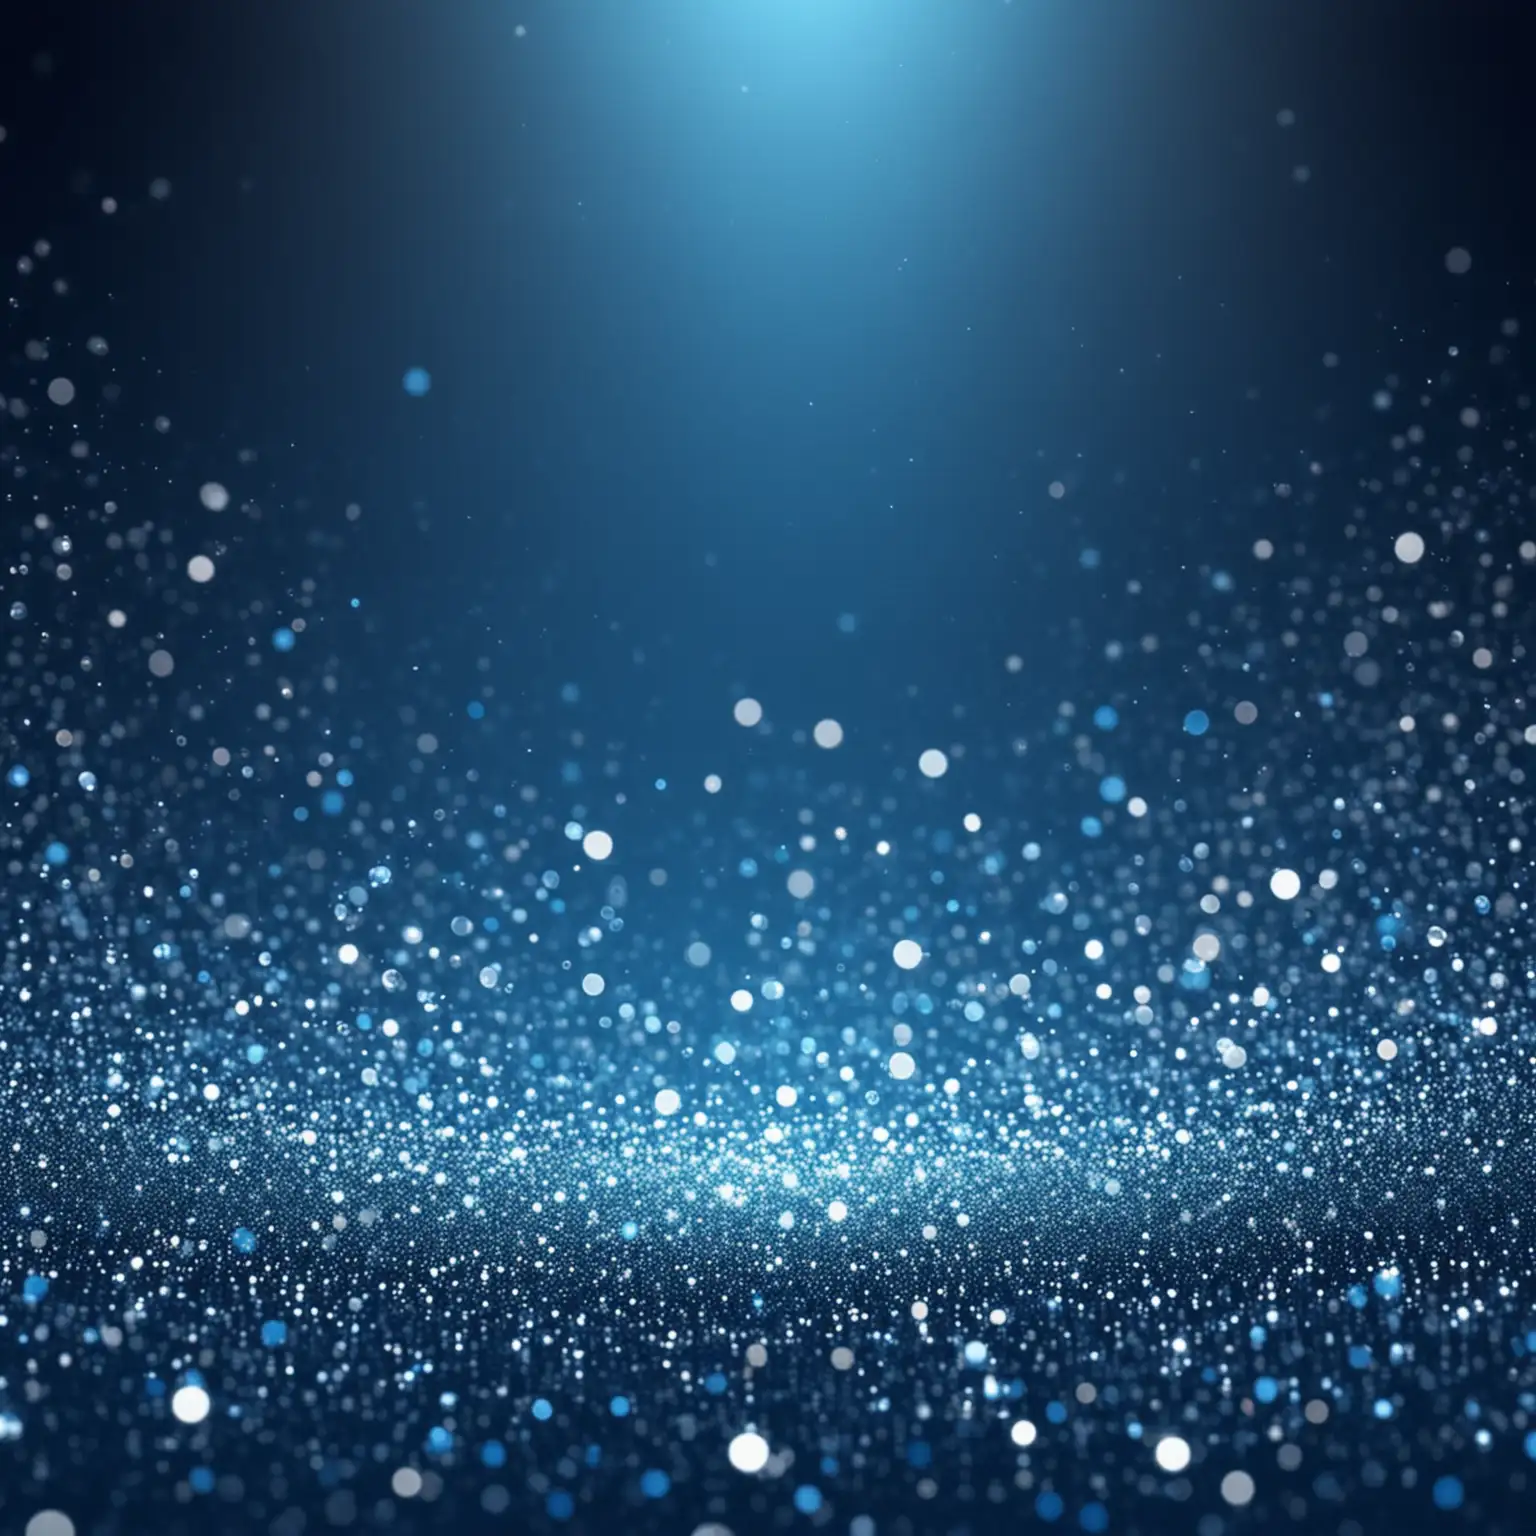 Blue Sparkling Background with Glittering Stars and Nebula